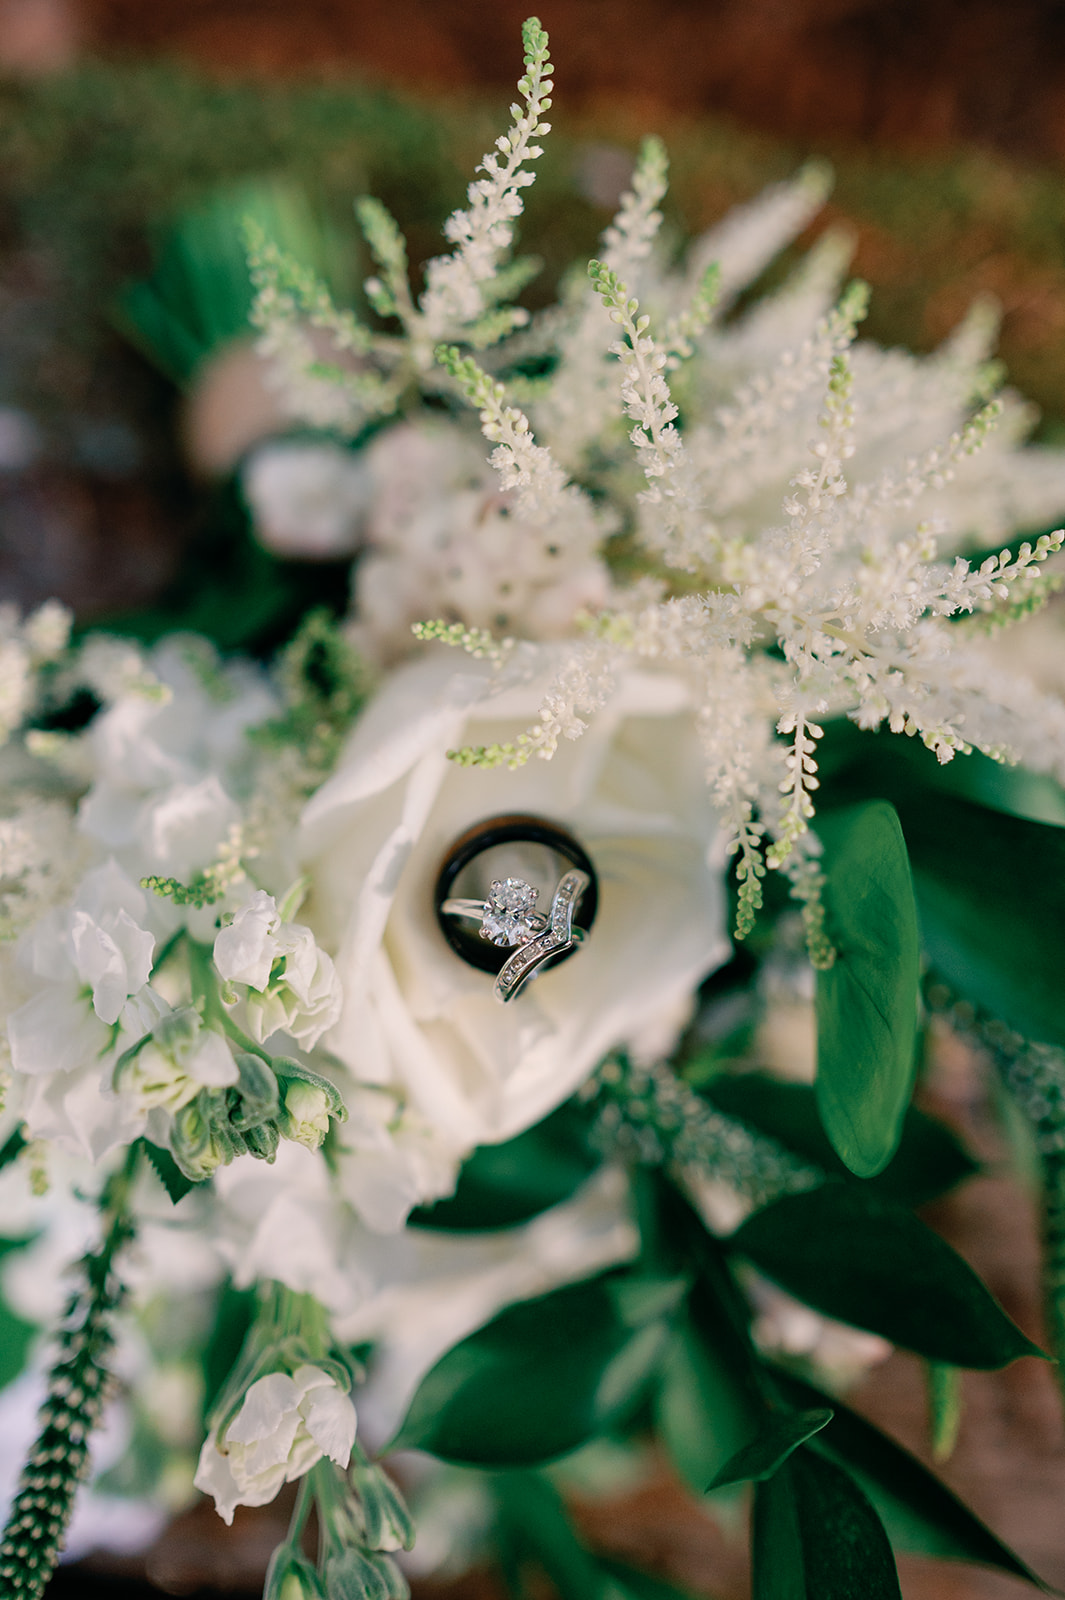 Details of wedding rings sitting in a white rose bouquet at a Joshua Tree Wedding